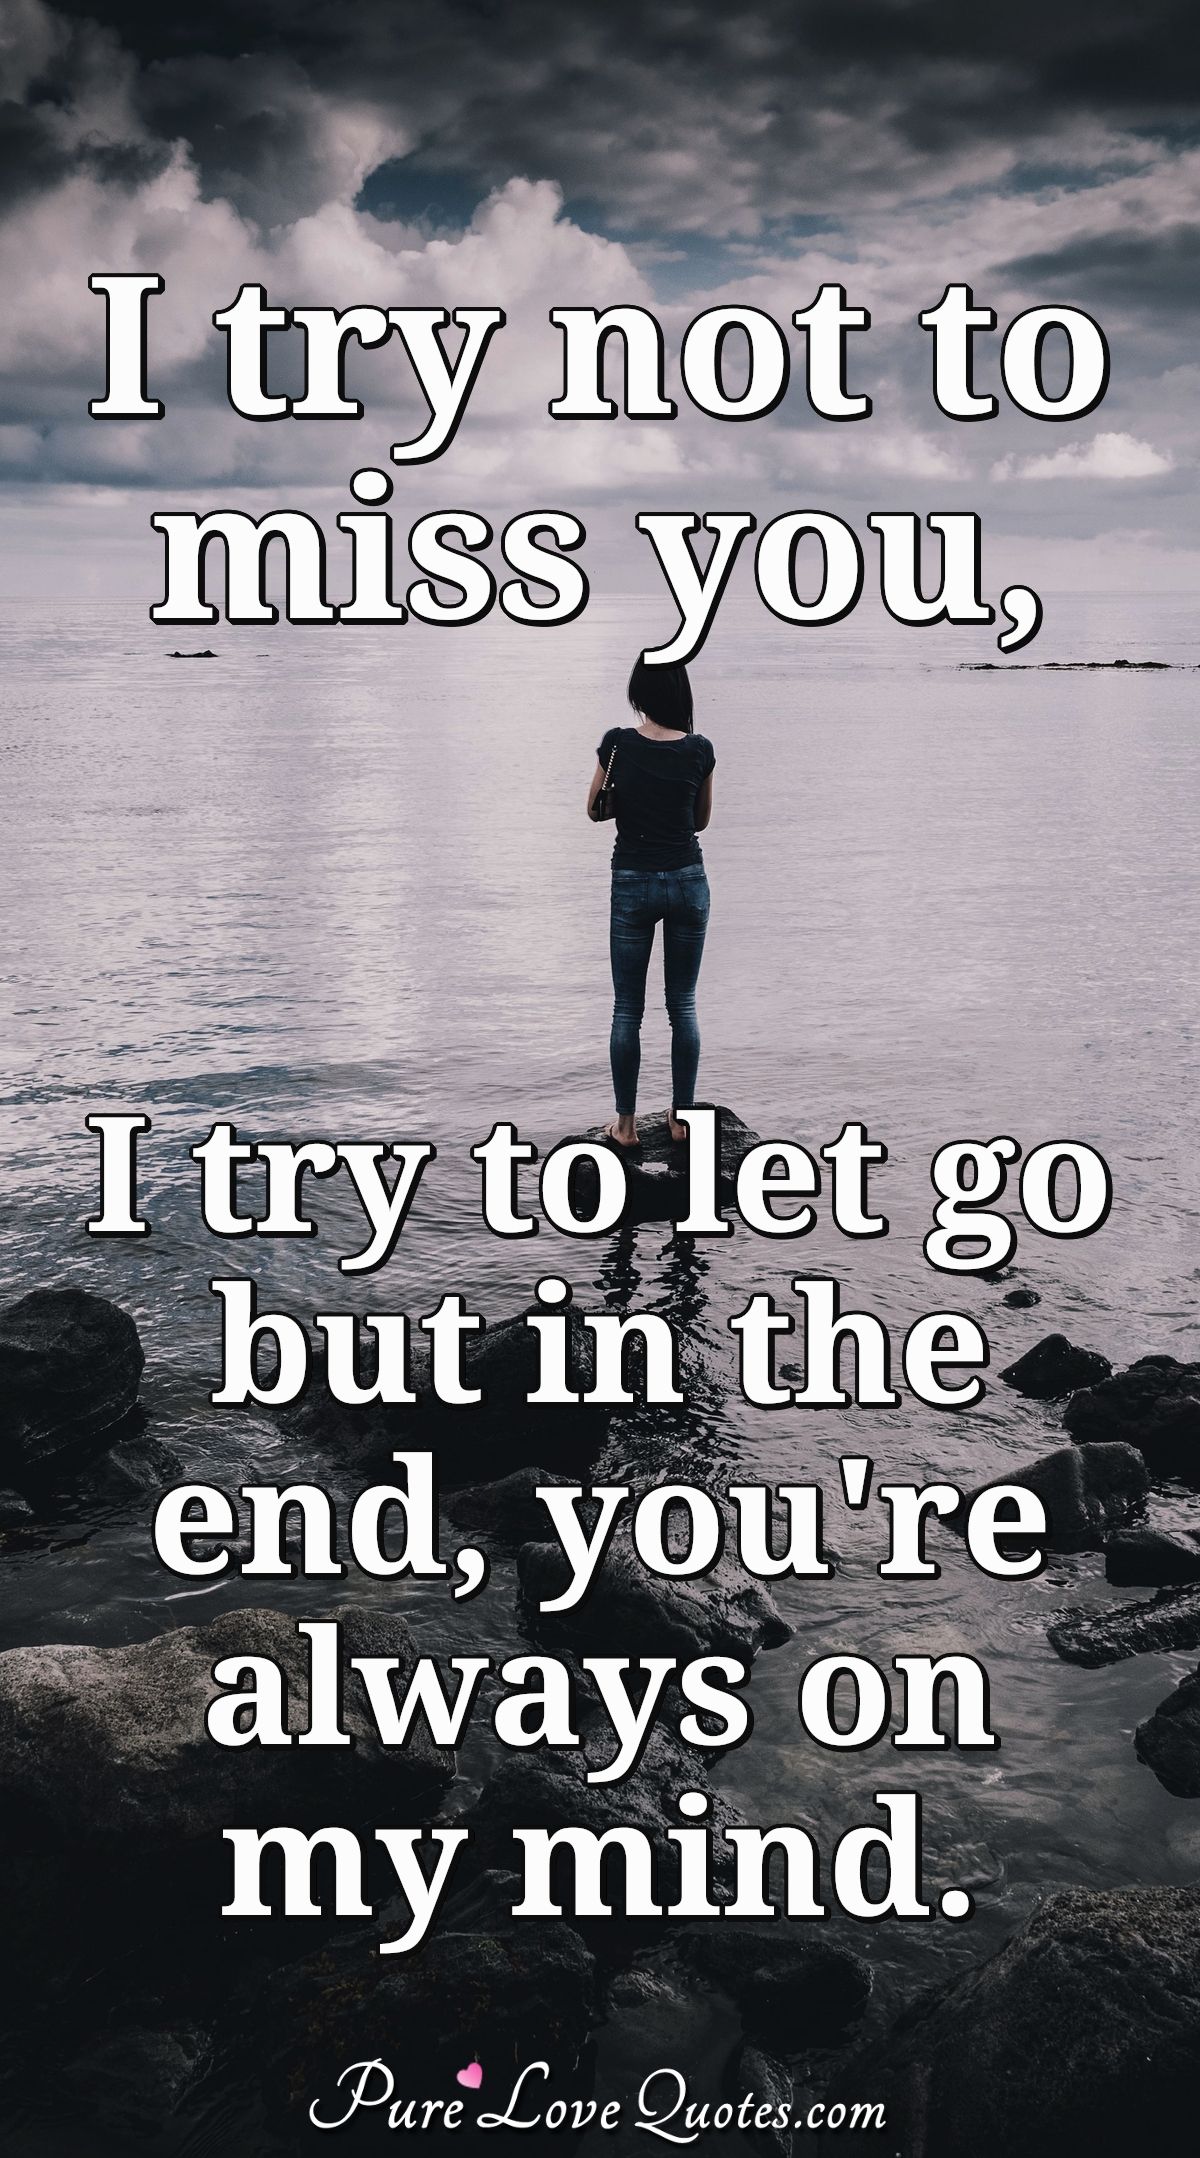 I try not to miss you, I try to let go but in the end, you're always on my mind. - Anonymous